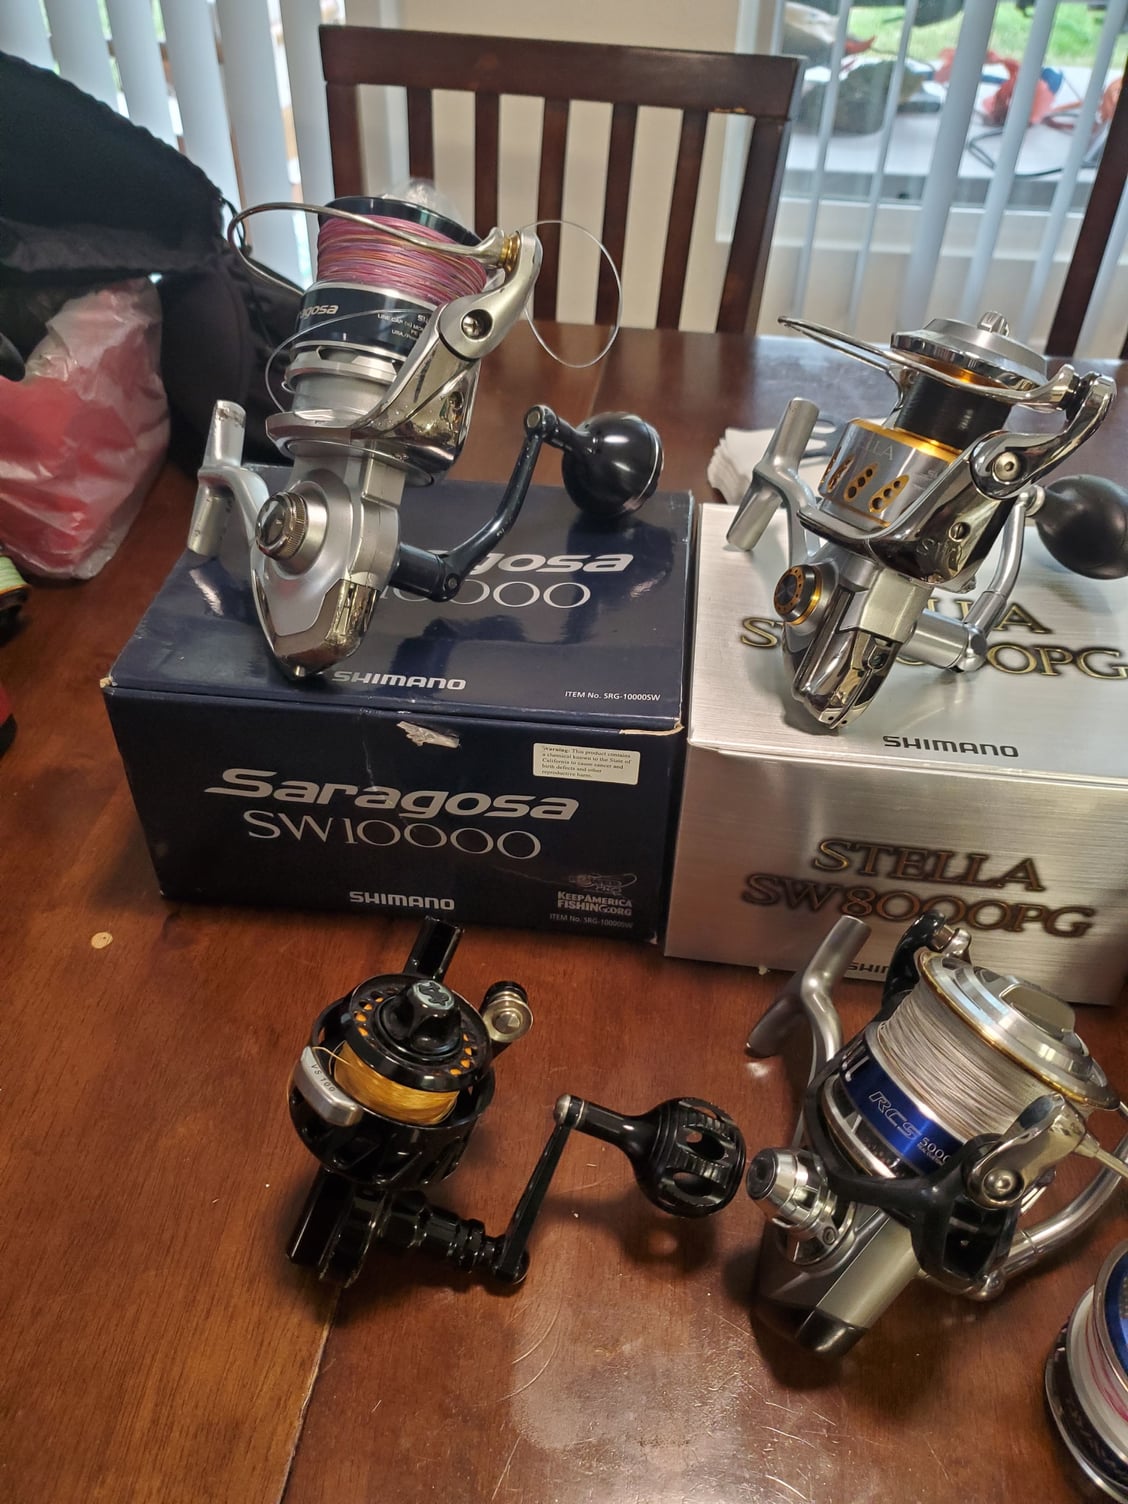 WTS Stella's, saltigas, van staal, saragosas - The Hull Truth - Boating and Fishing  Forum